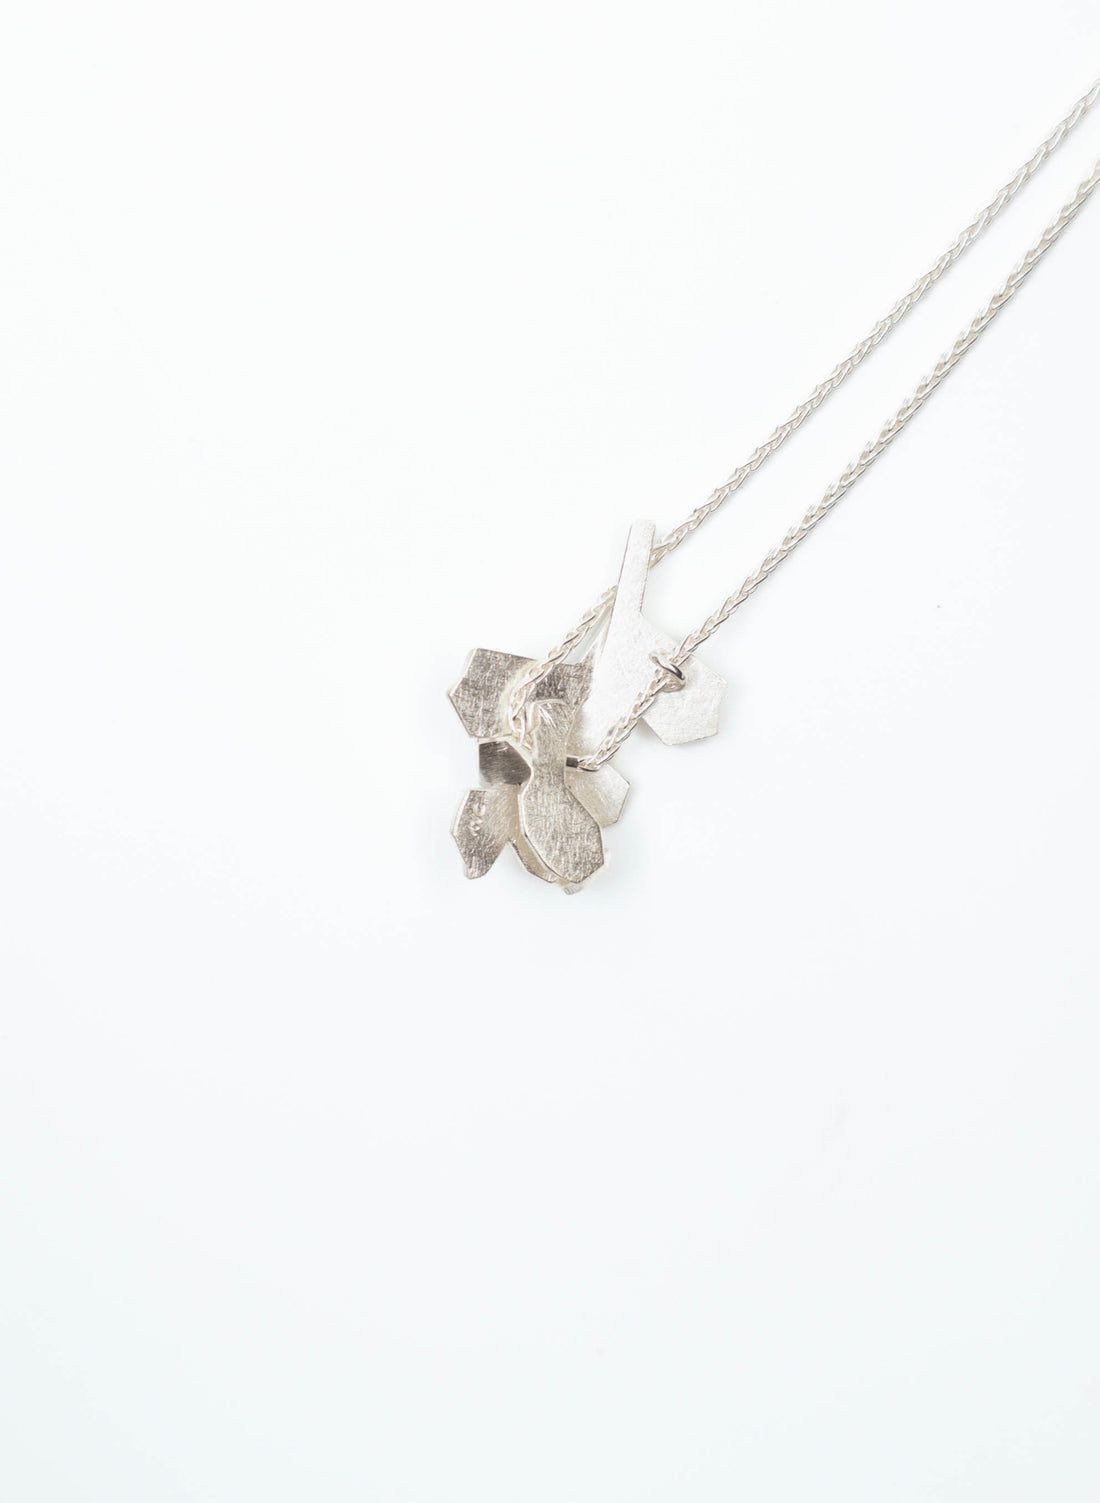 Intertwined Leaf Structure Necklace